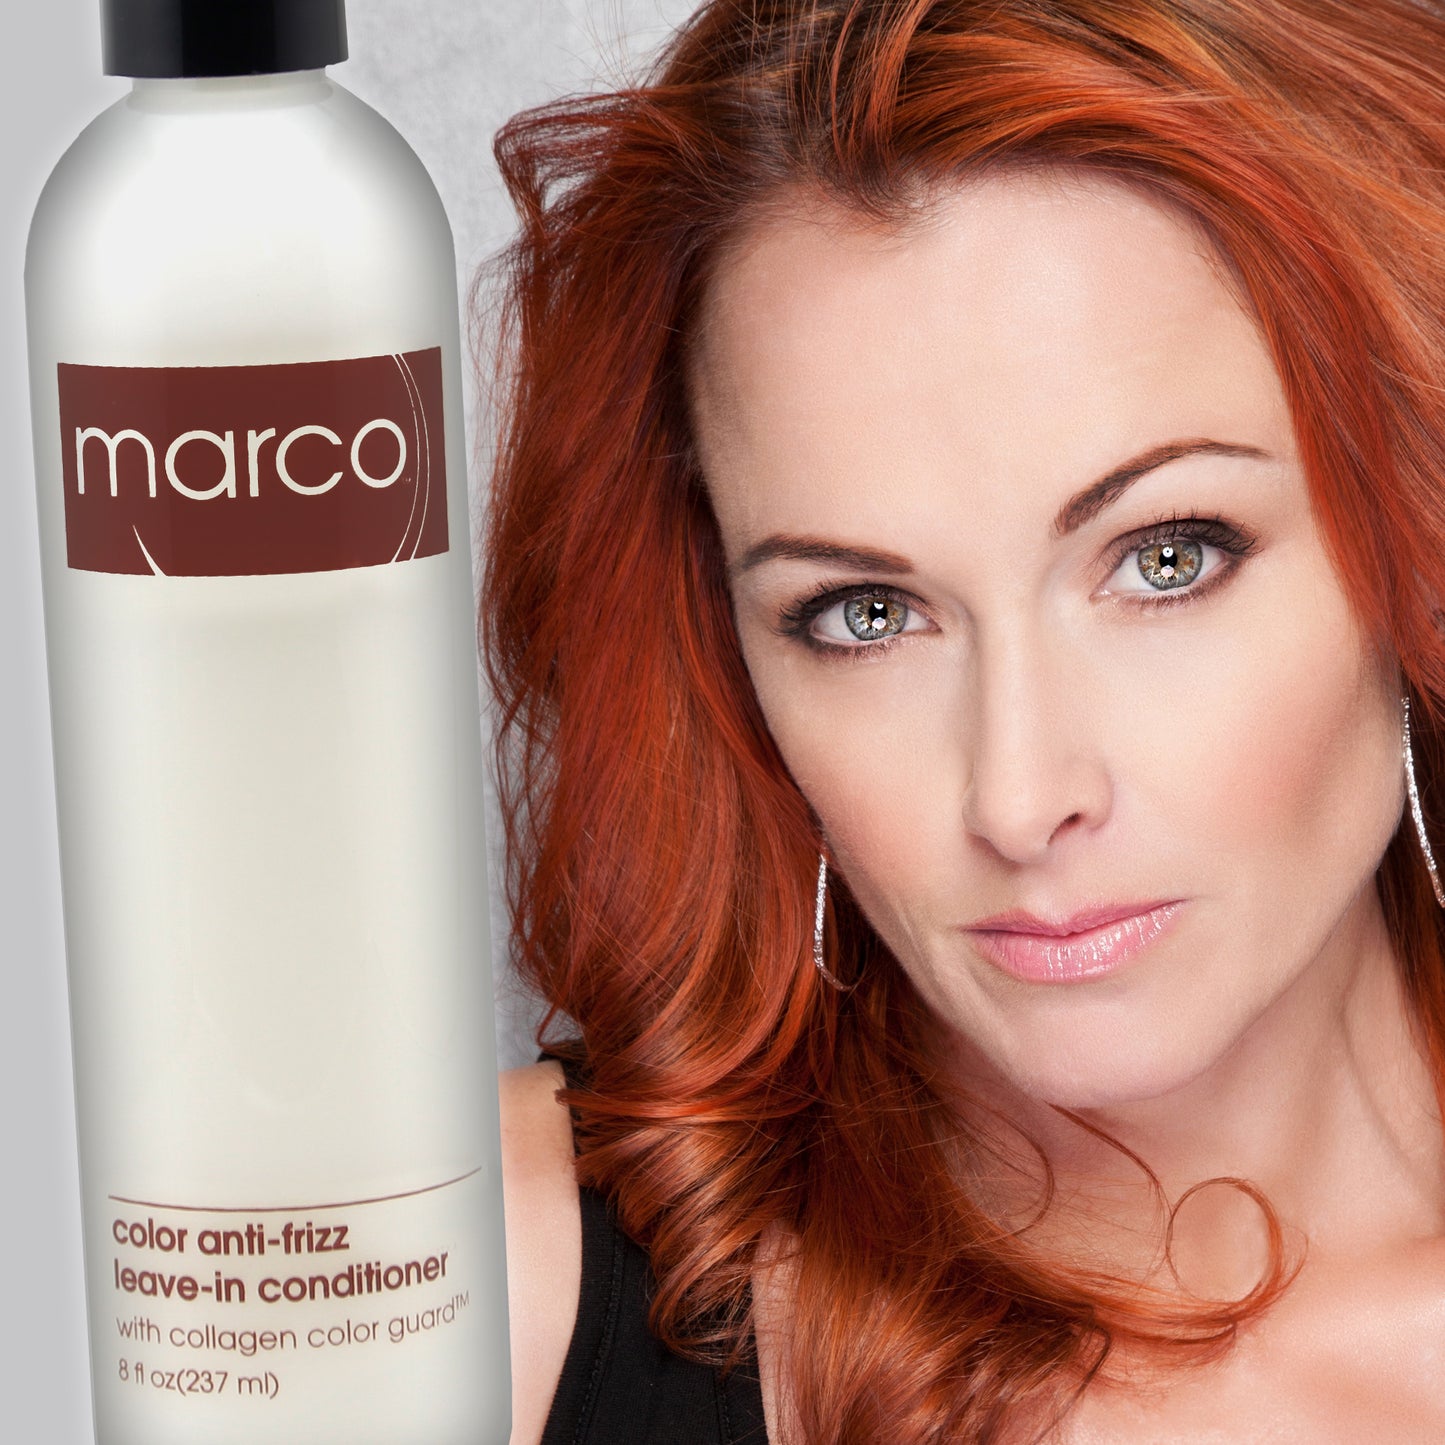 Sultry model with healthy vibrant red colored hair next to bottle of Marco anti-frizz leave-in conditioner